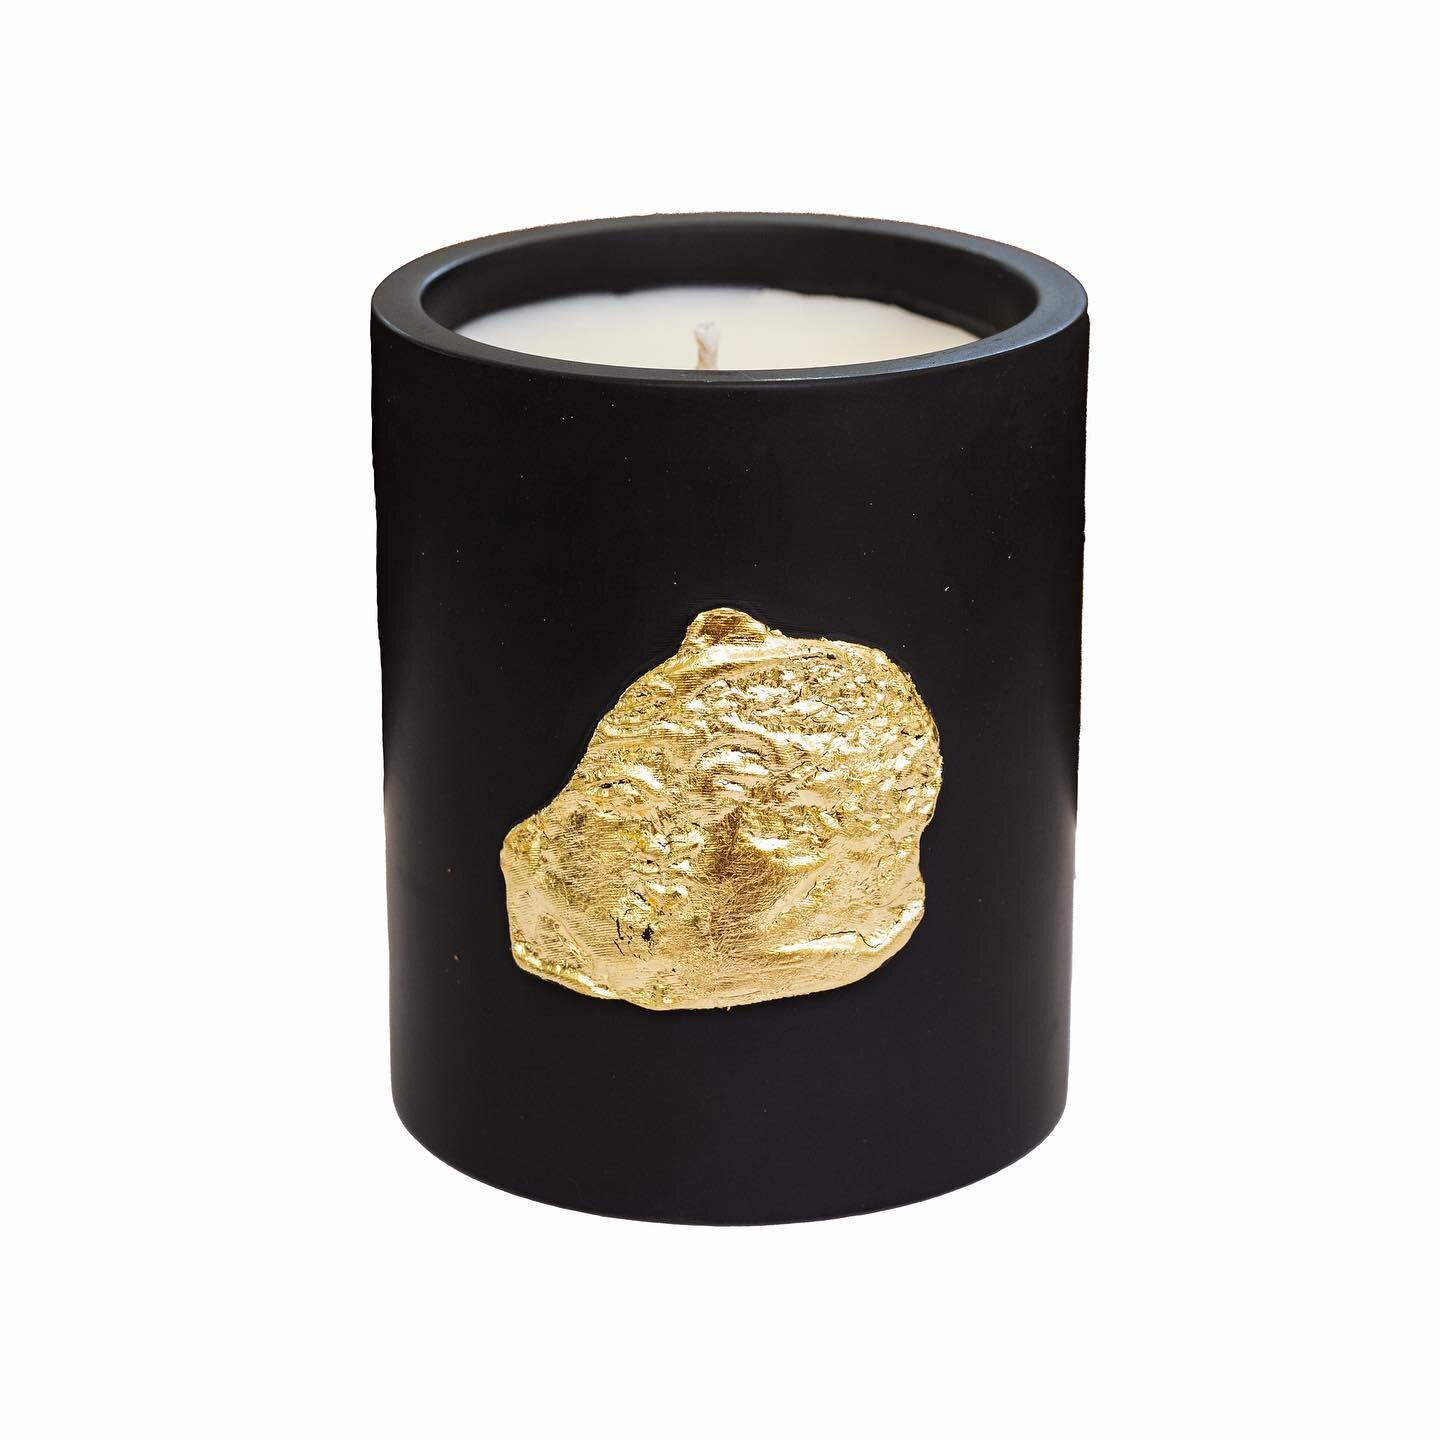 Lovers Kiss candle in exquisite black stone, hand painted with gold. Perfumed with orchids, lily of the valley, vanilla and incense smoke. A beautiful addition to your home's aesthetic.